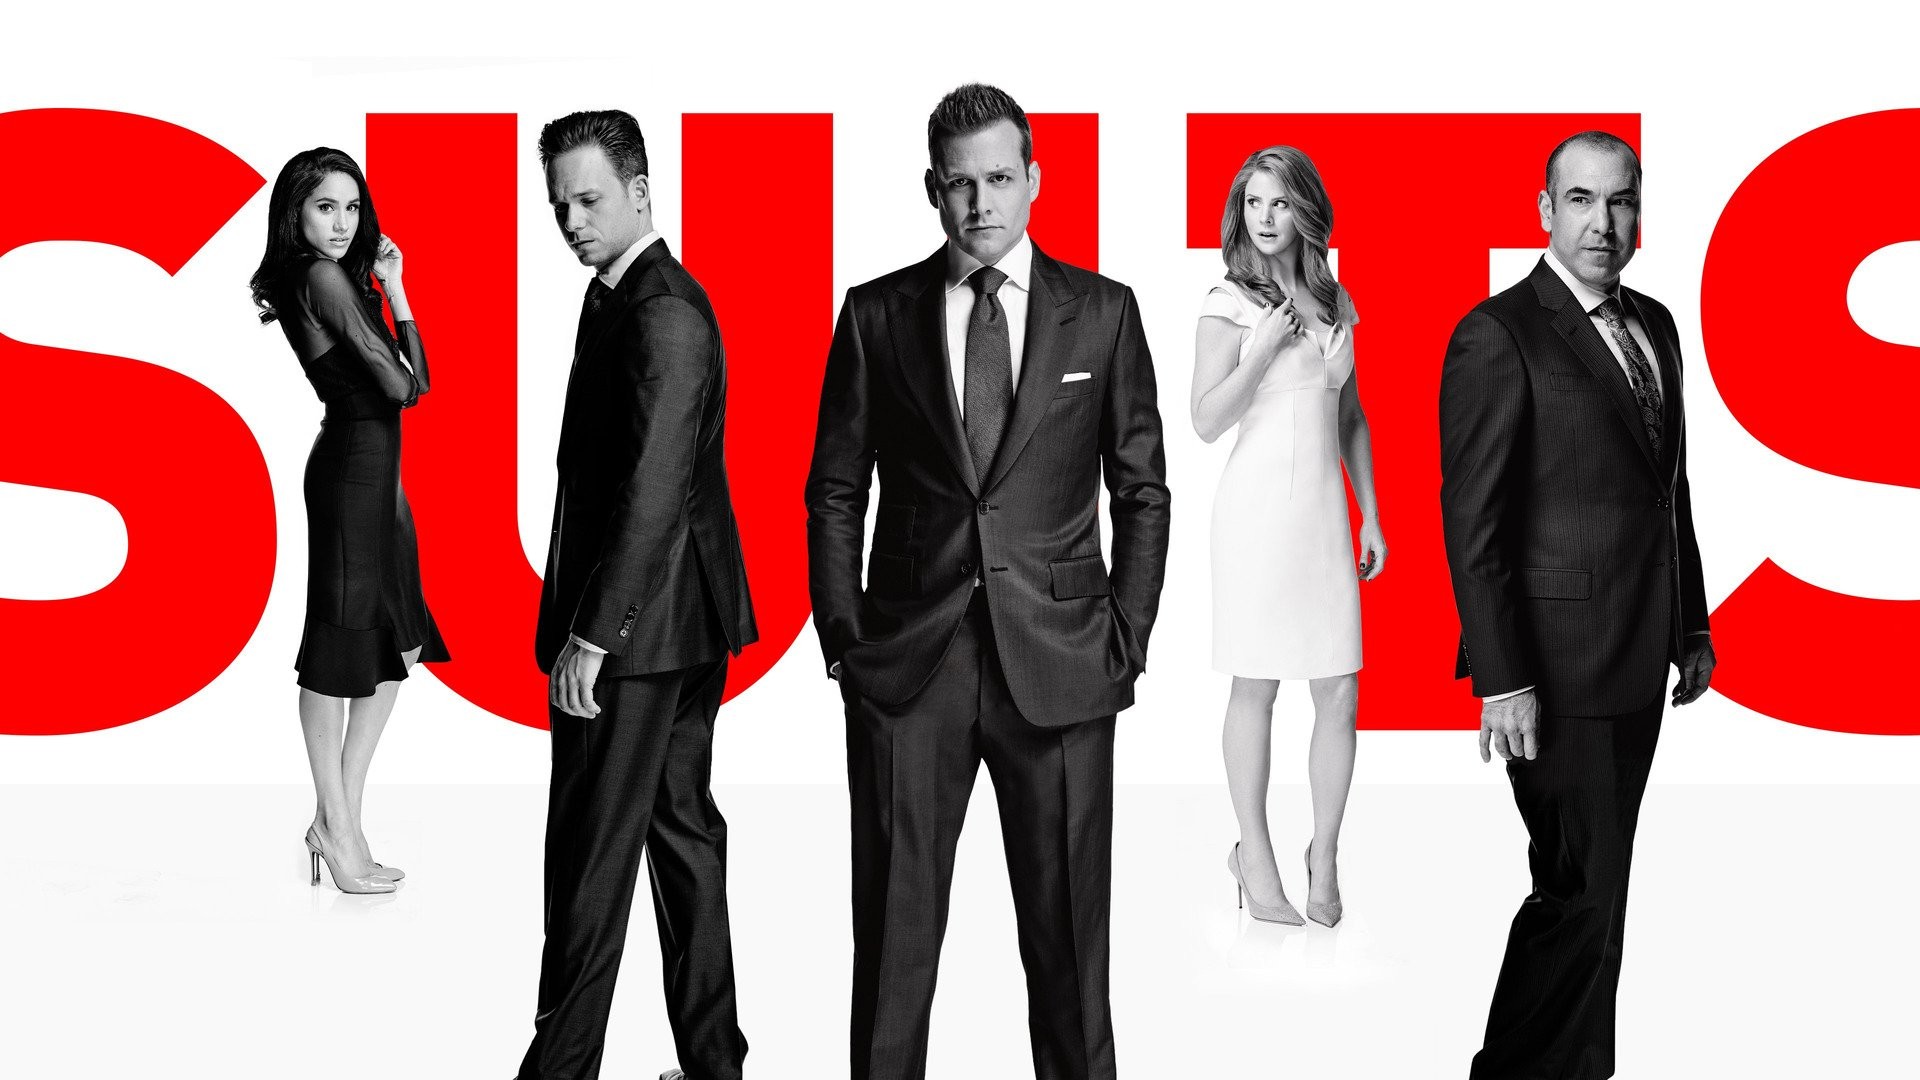 Suits - See Suits from the beginning! Starting tomorrow, you can watch all  22 episodes online or On Demand. Download this companion Episode Guide so  you don't miss a moment of USA